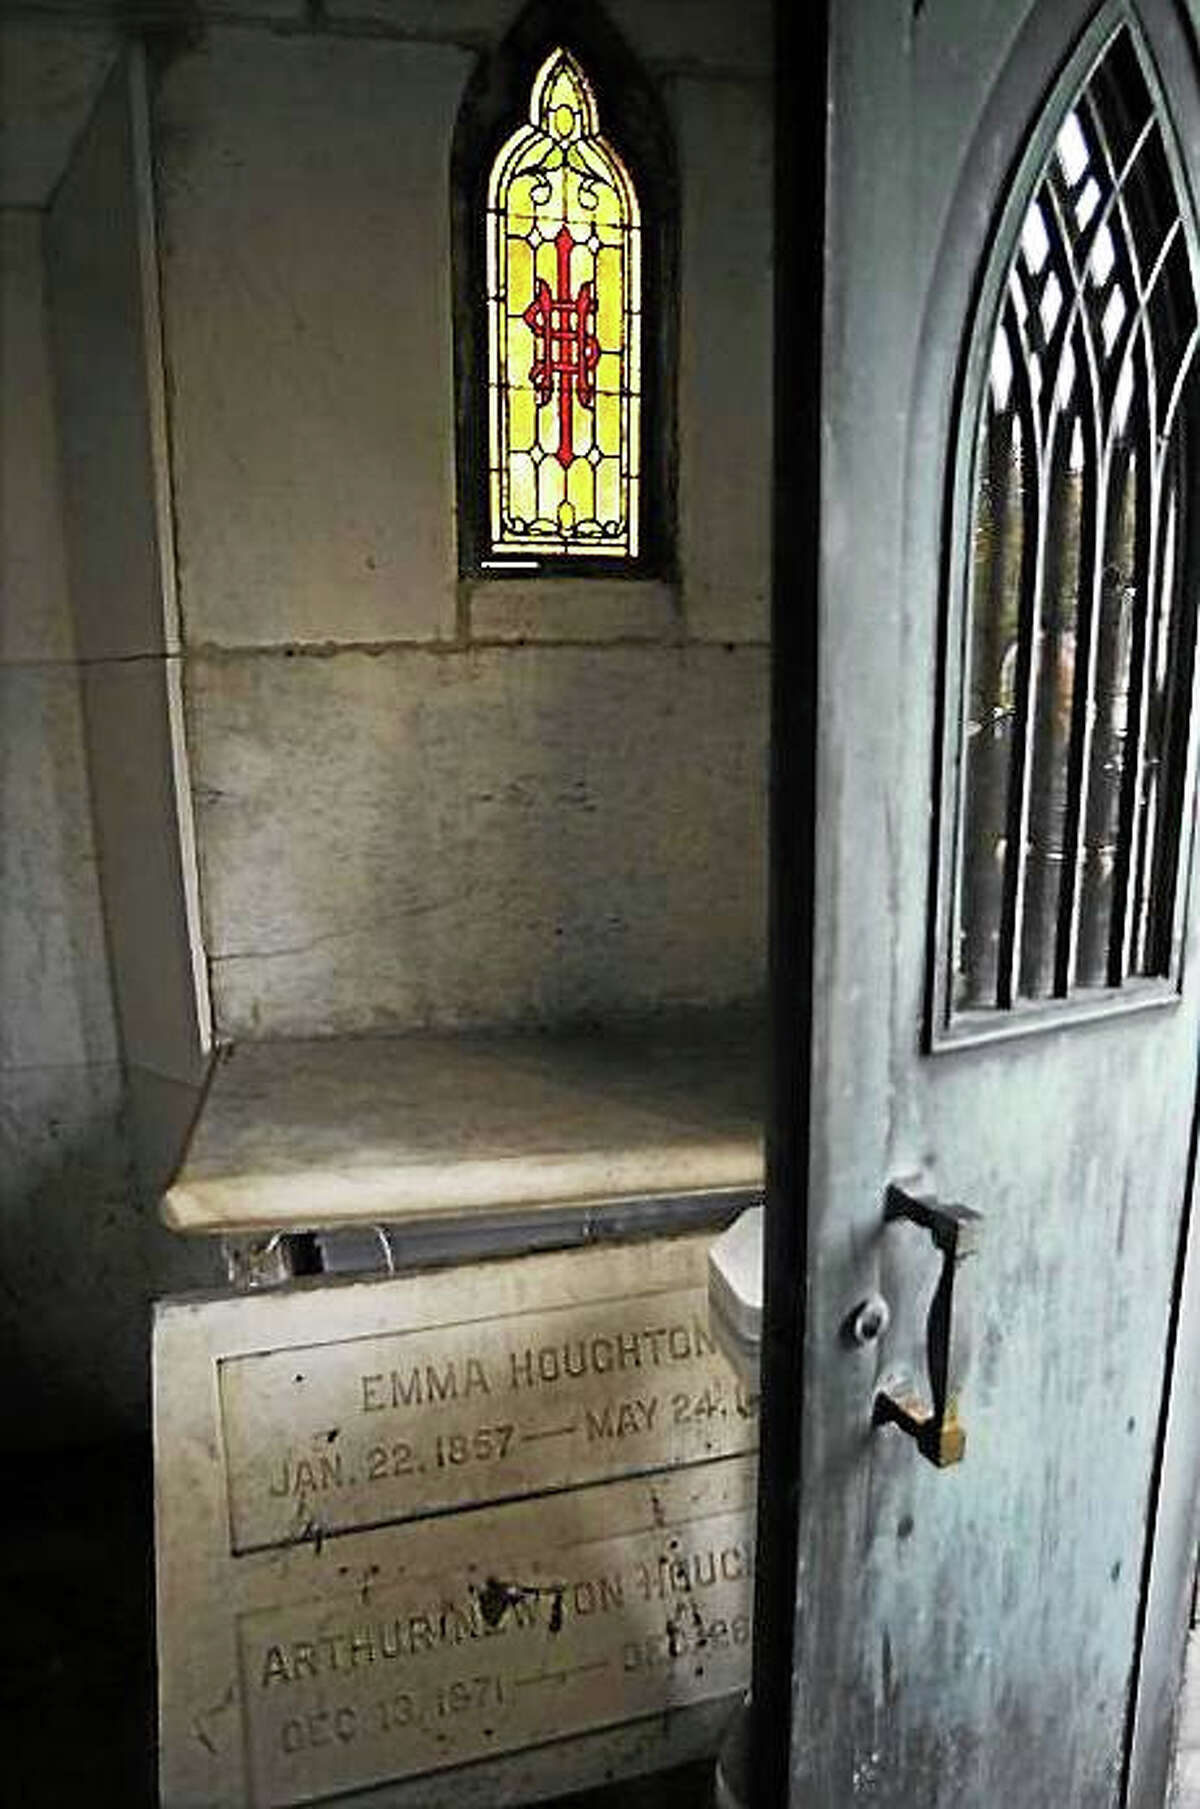 Screenshot via telegram.com: The Houghton family mausoleum appears to have been entered and disturbed in this photo taken Nov. 1. (T&G file photo/Christine Peterson)